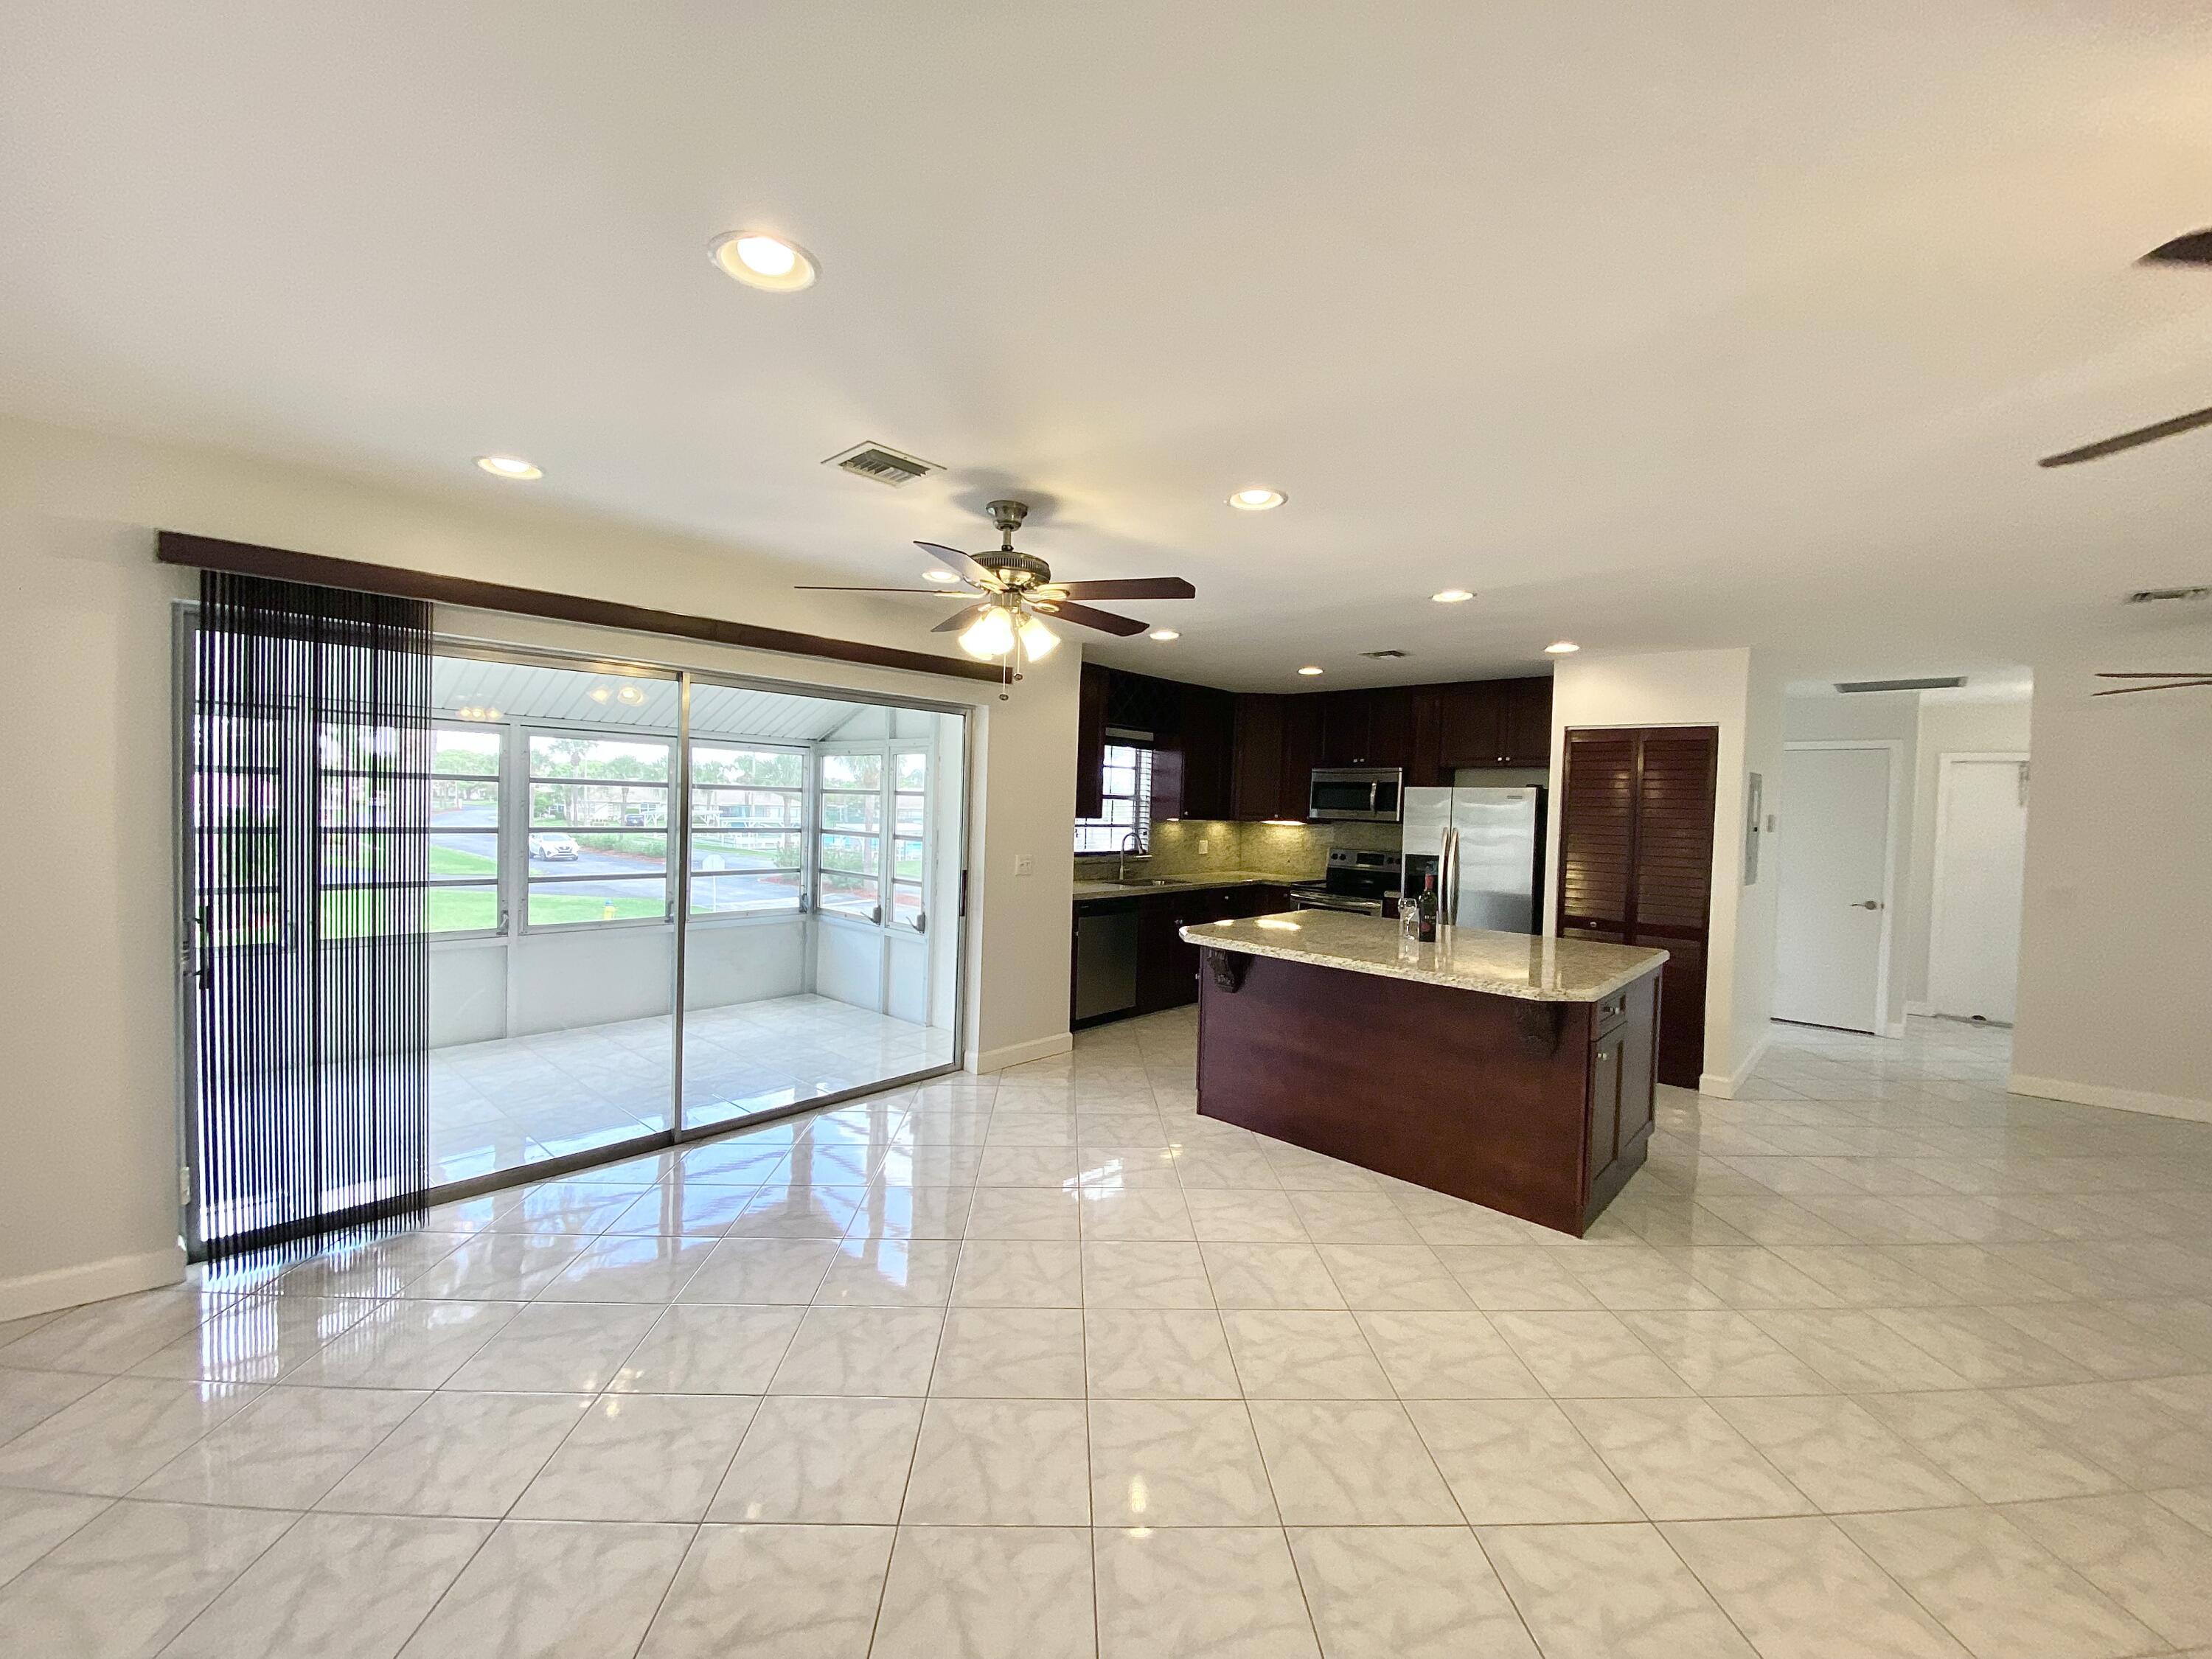 a large kitchen with stainless steel appliances kitchen island granite countertop a refrigerator and a sink